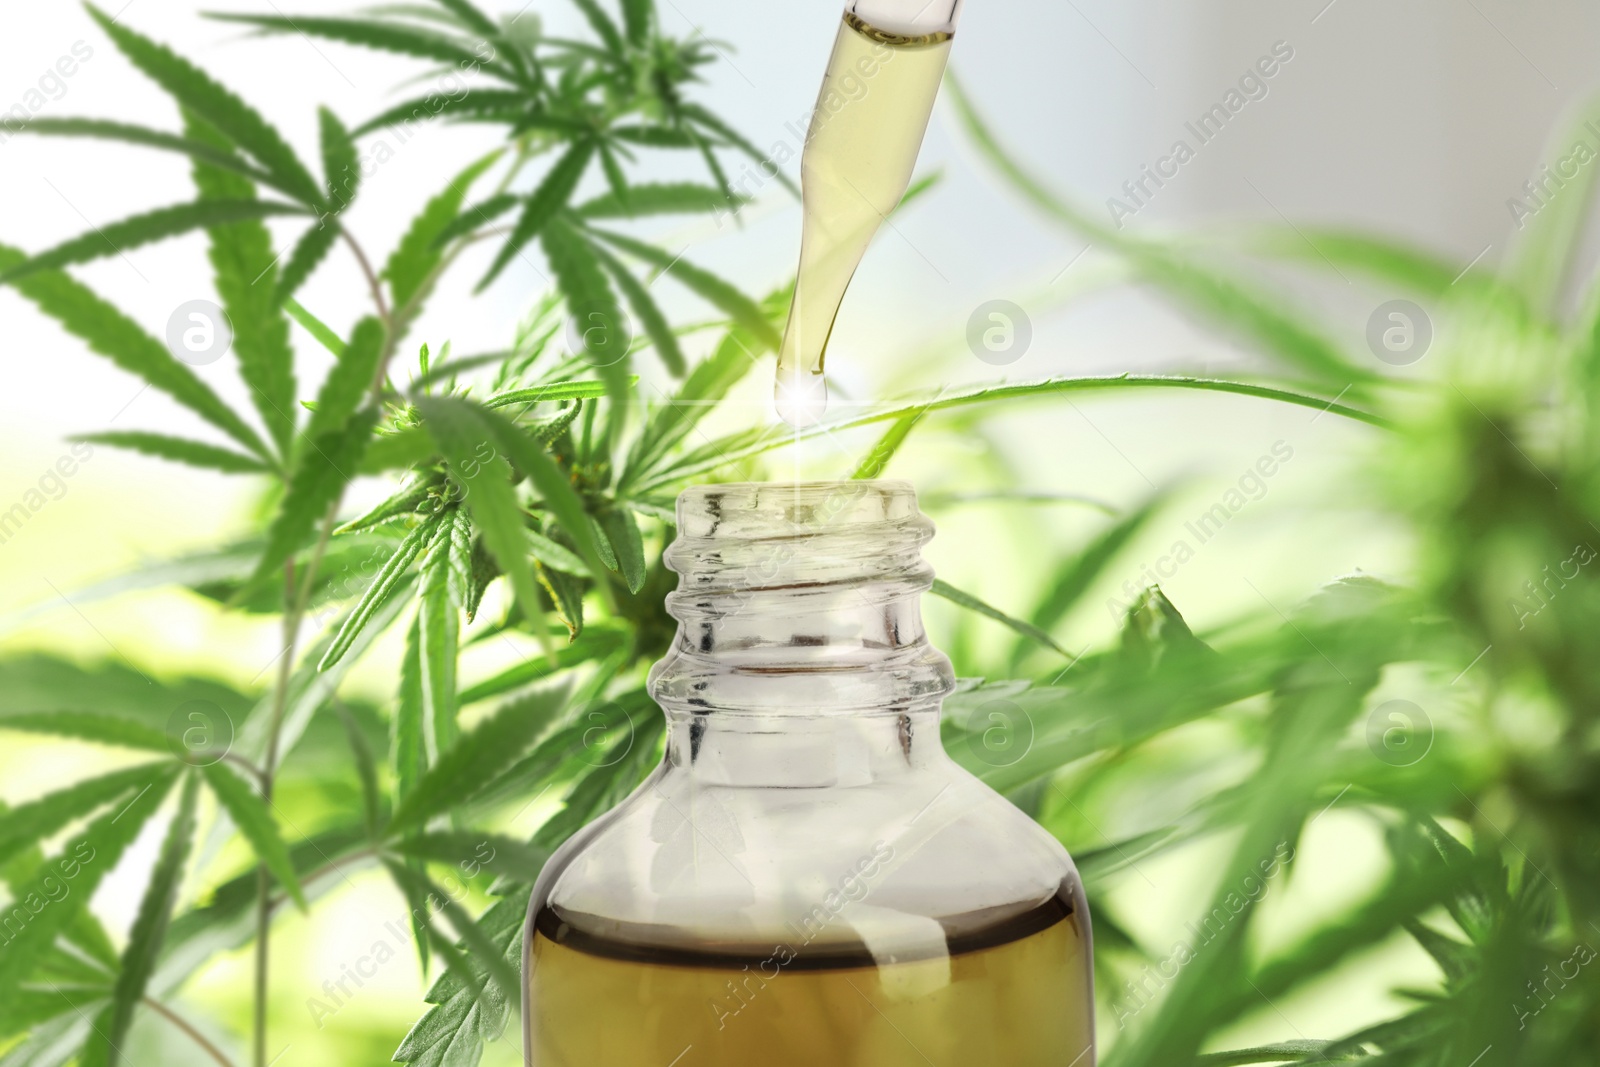 Image of Hemp oil and green plant on background